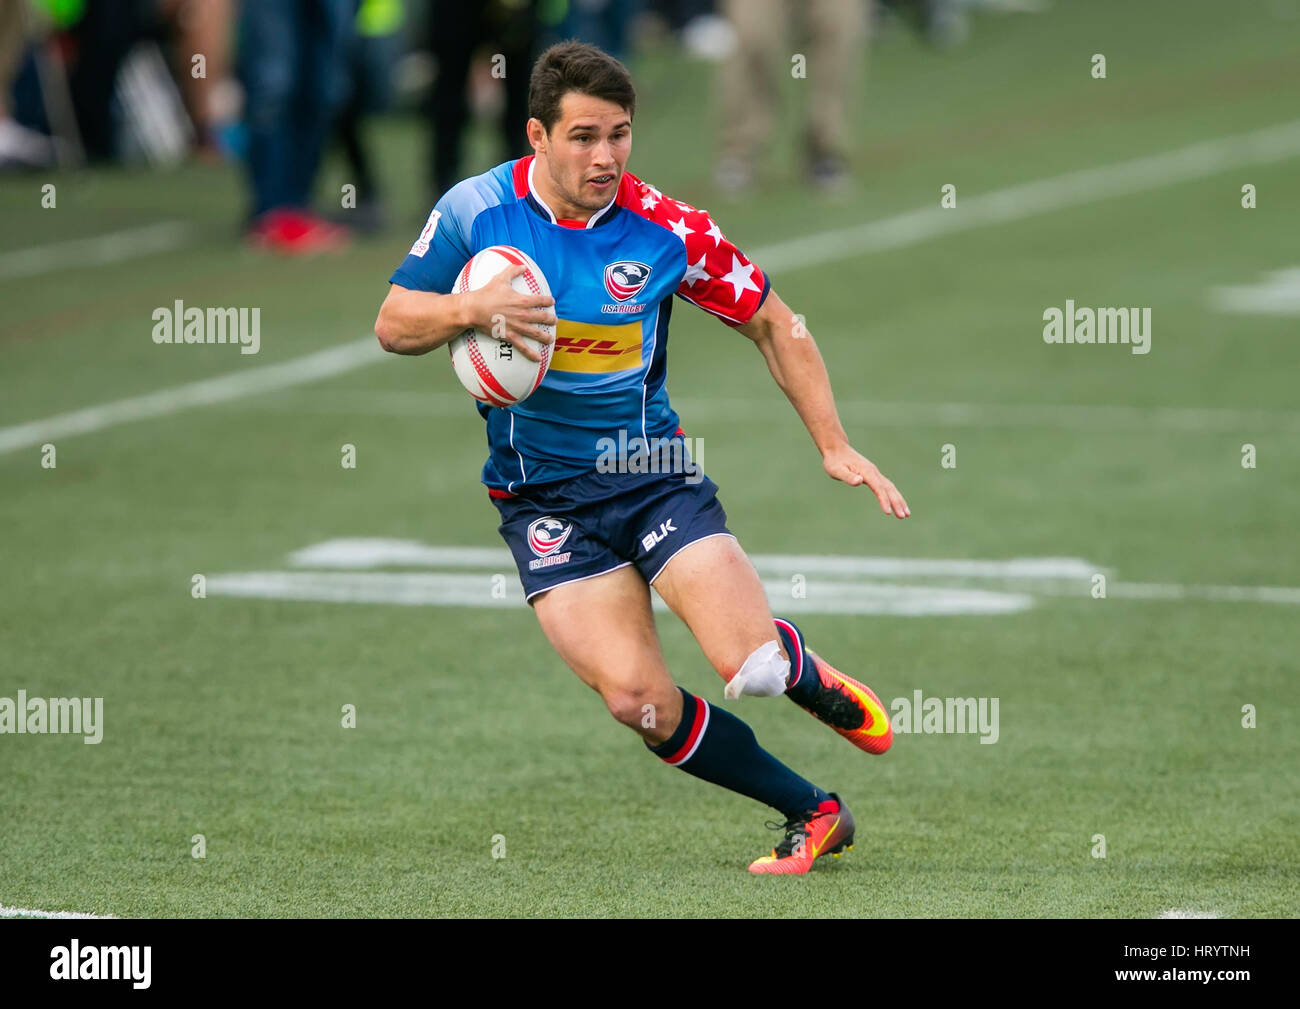 Las Vegas, NV, USA. 4th Mar, 2017. Madison Hughes #10 of USA in action during Pool B play of the rugby sevens match between the USA and England at Sam Boyd Stadium in Las Vegas, Nv. England defeated the US 24-17. Damon Tarver/Cal Sport Media/Alamy Live News Stock Photo